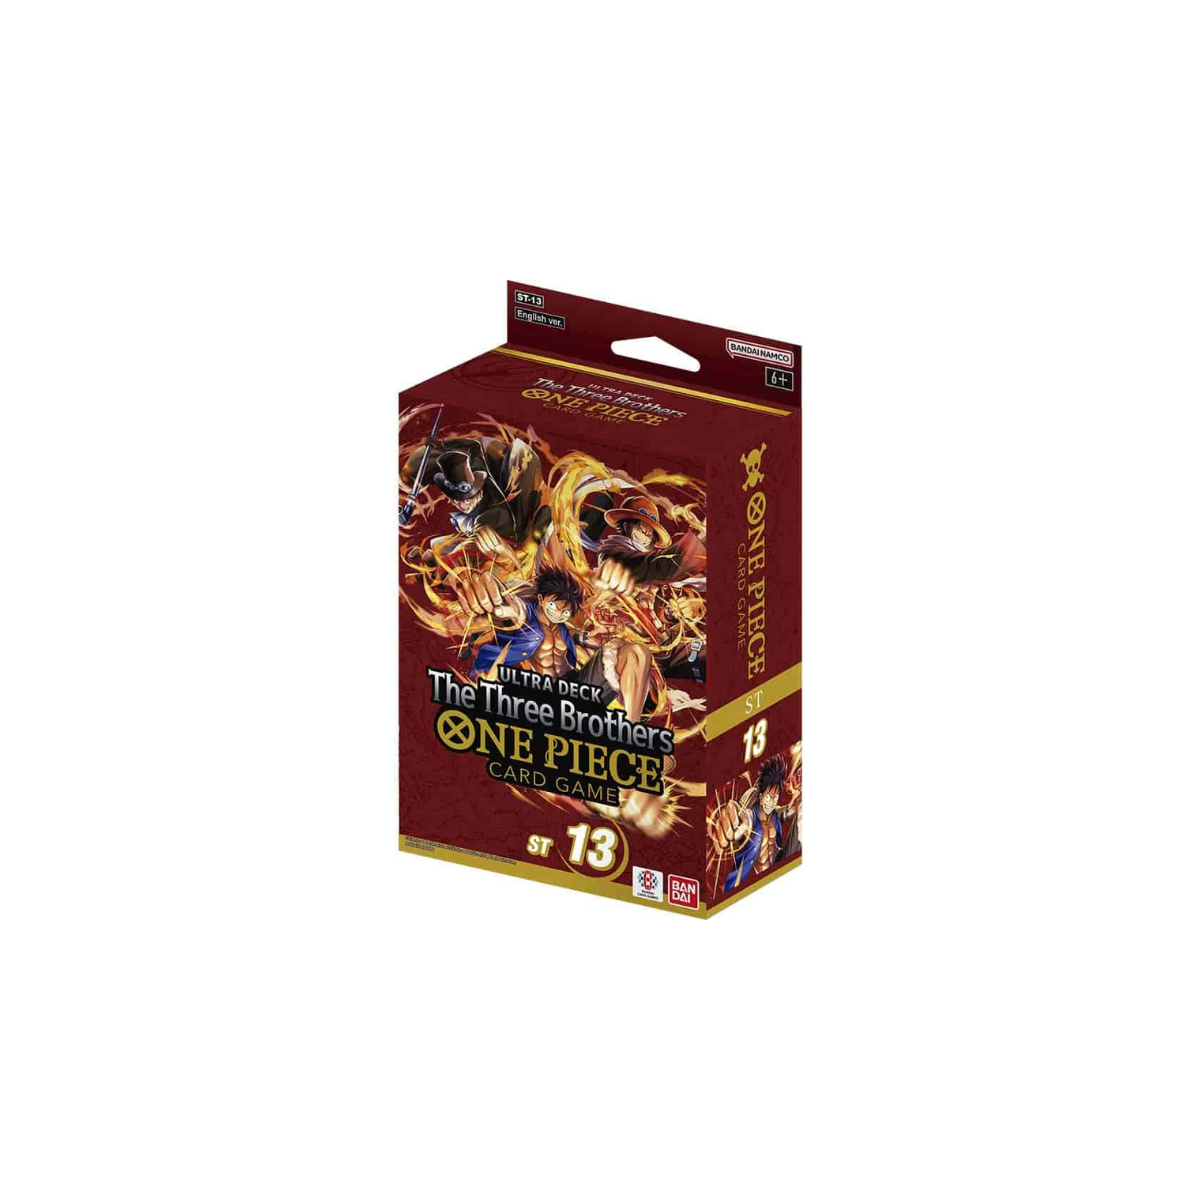 One Piece Card Game - The Three Brothers ST-13 Ultra Starter Deck - EN